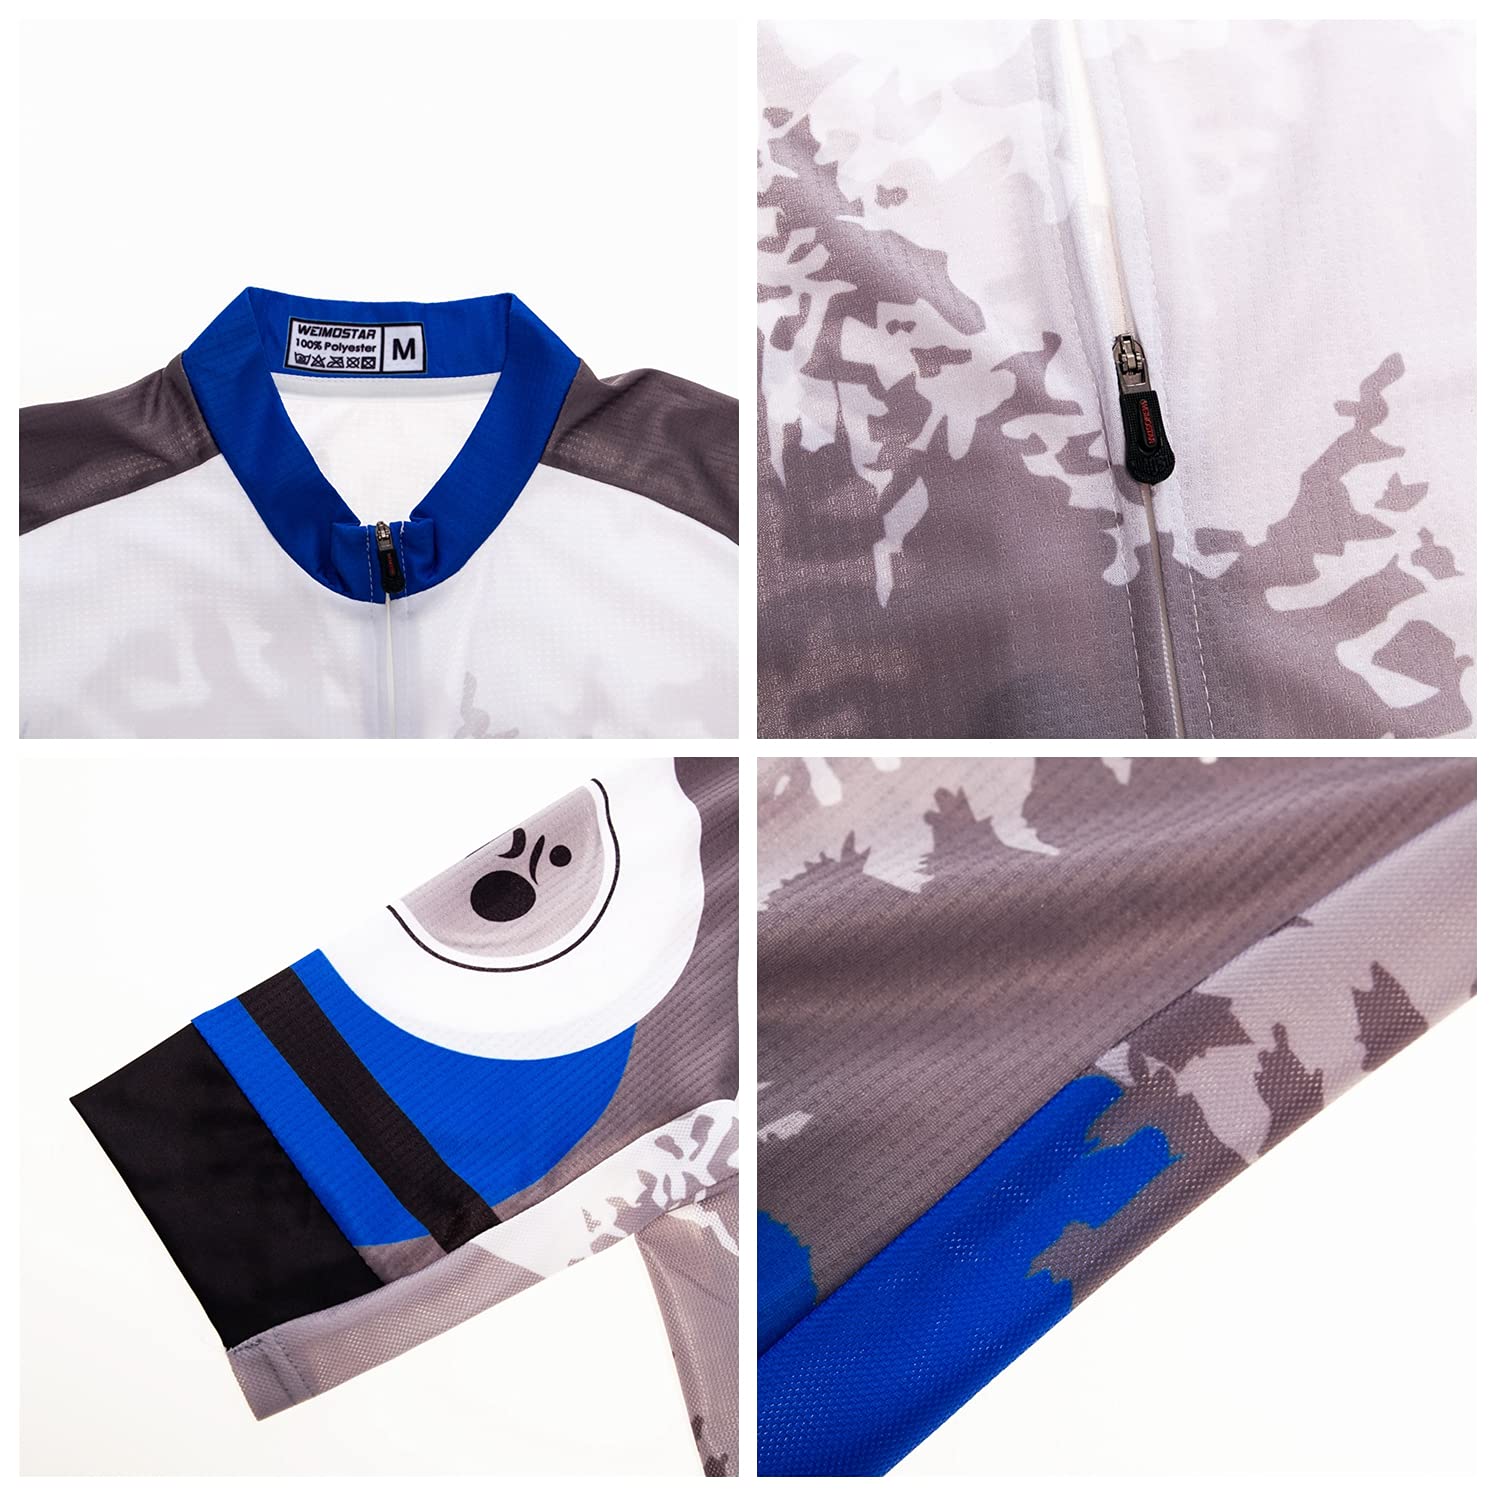 Personalized Design Printed Cycling Jersey Shorts Padded Men Bike Top Uniform Suits